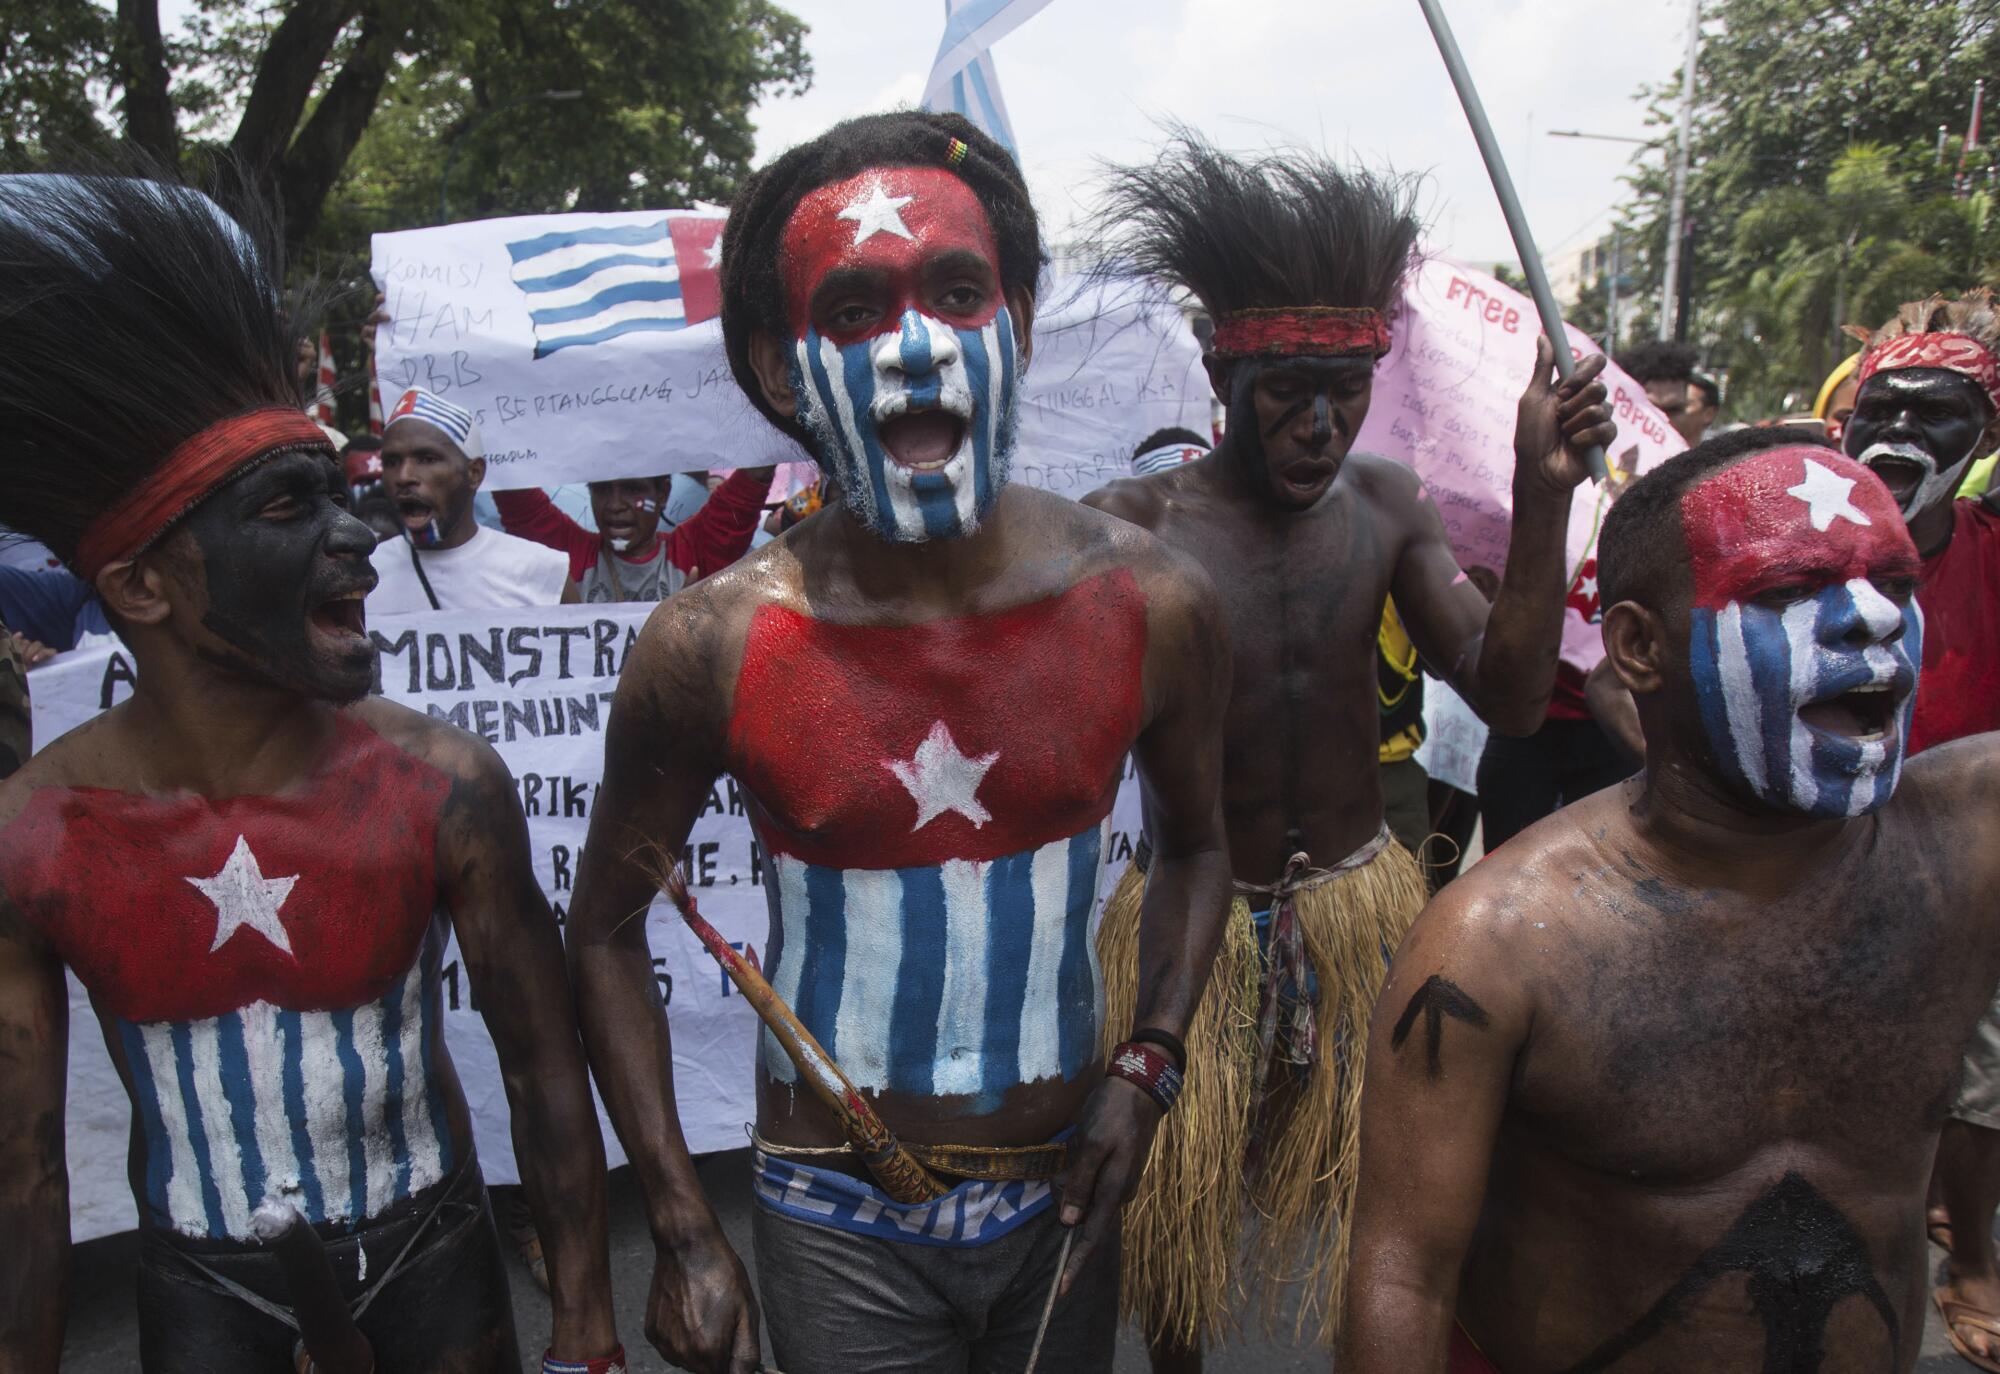 Papuan students with their bodies and faces painted with the colors of the banned separatist Morning Star flag.